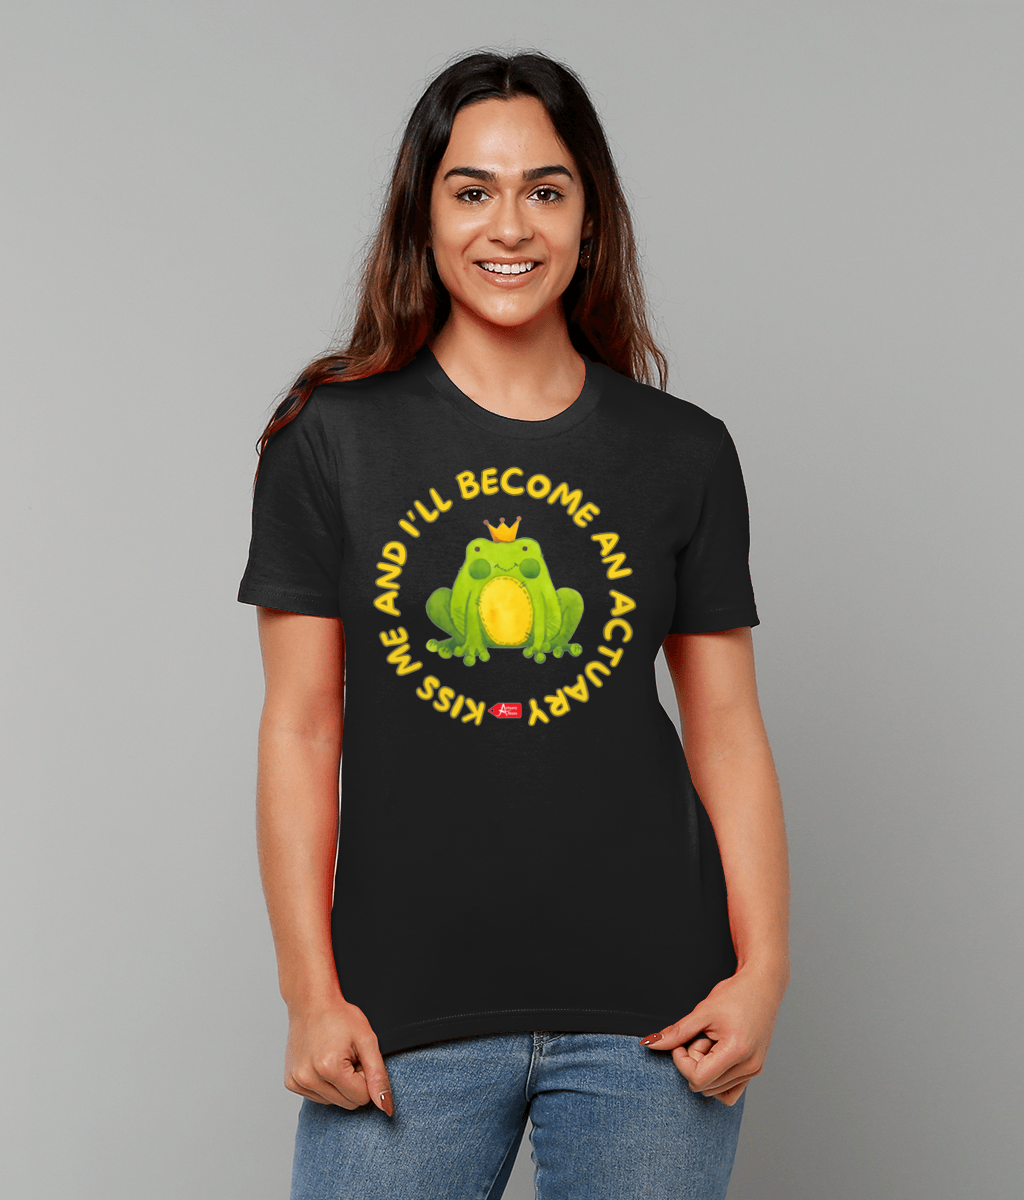 Kiss Me And I'll Become An Actuary T-Shirt (Black and White Variations)